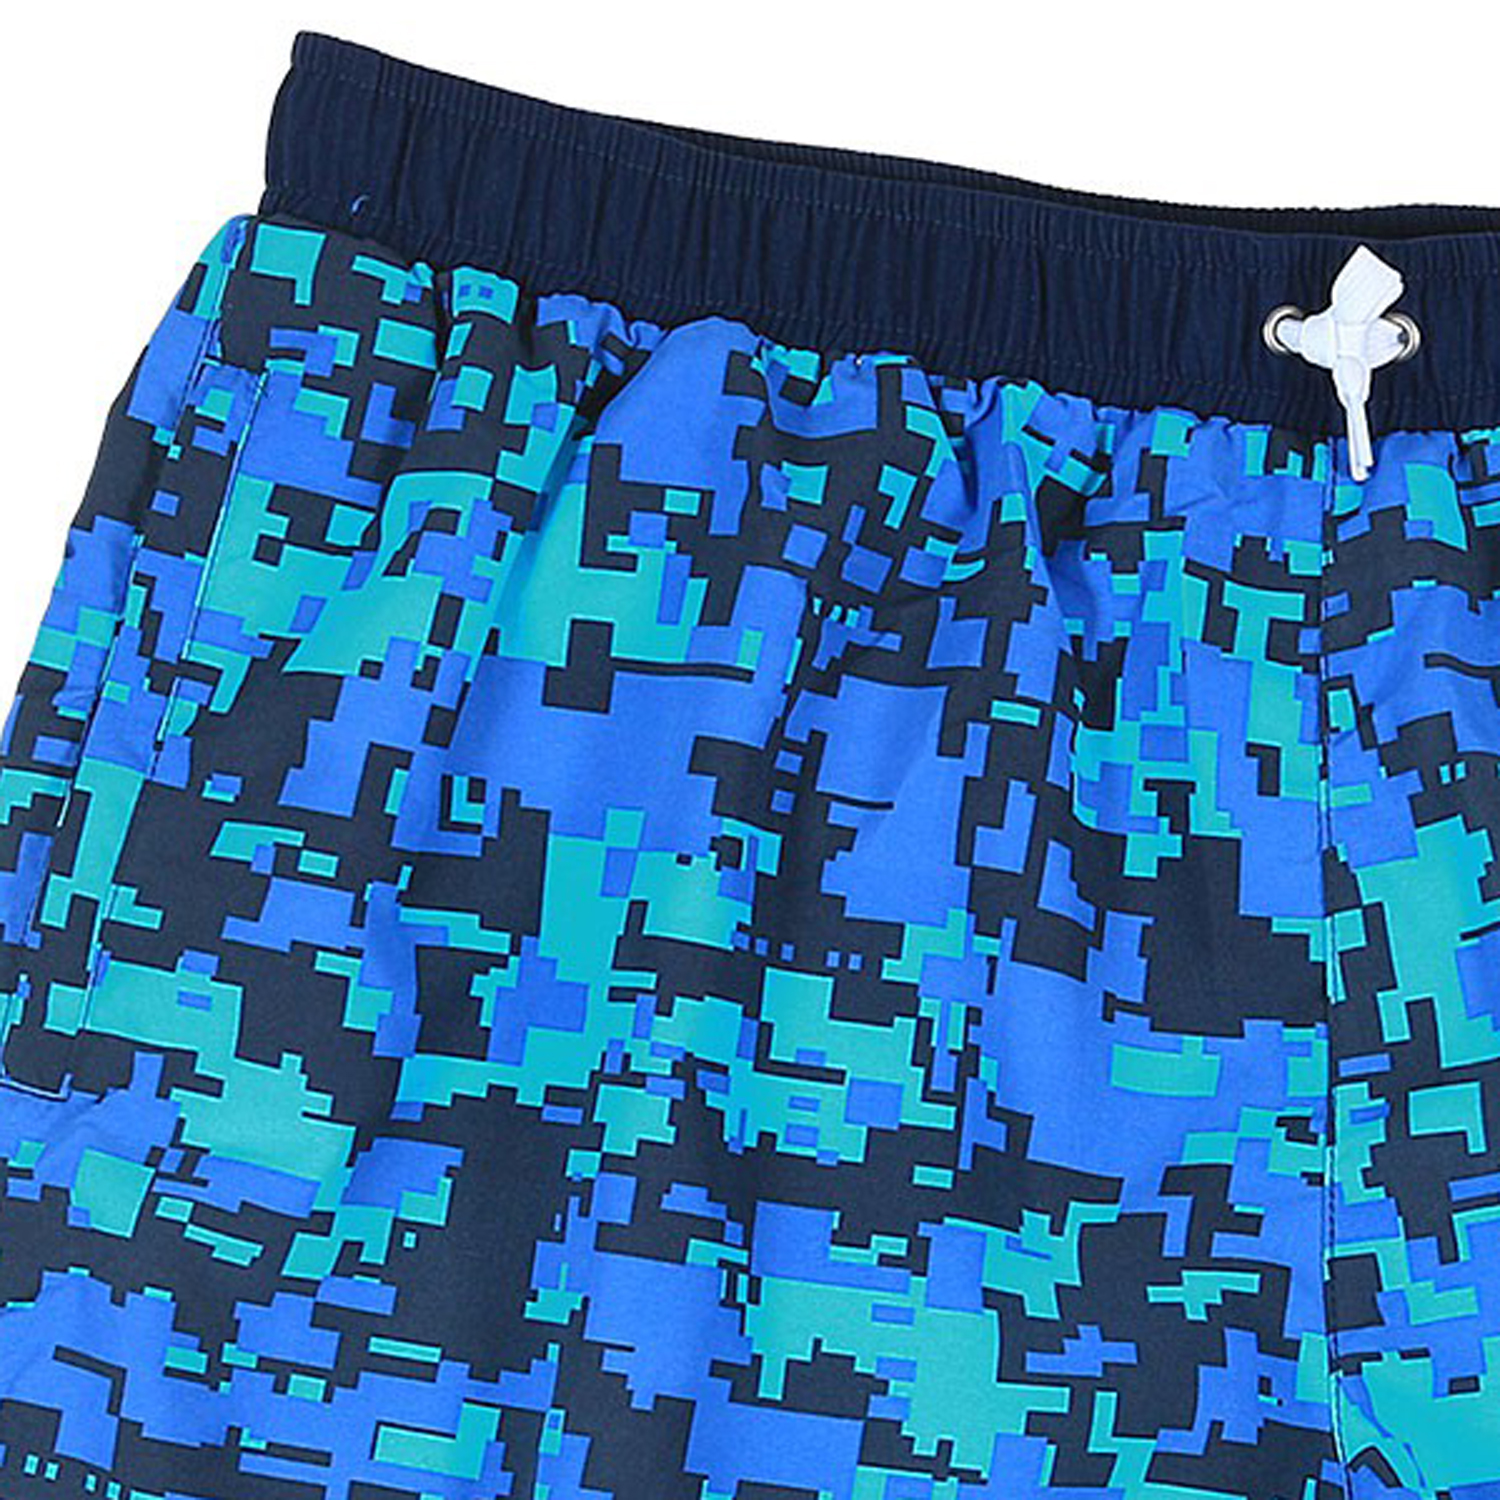 Abraxas swimming trunks in big sizes up to 10XL, print blue